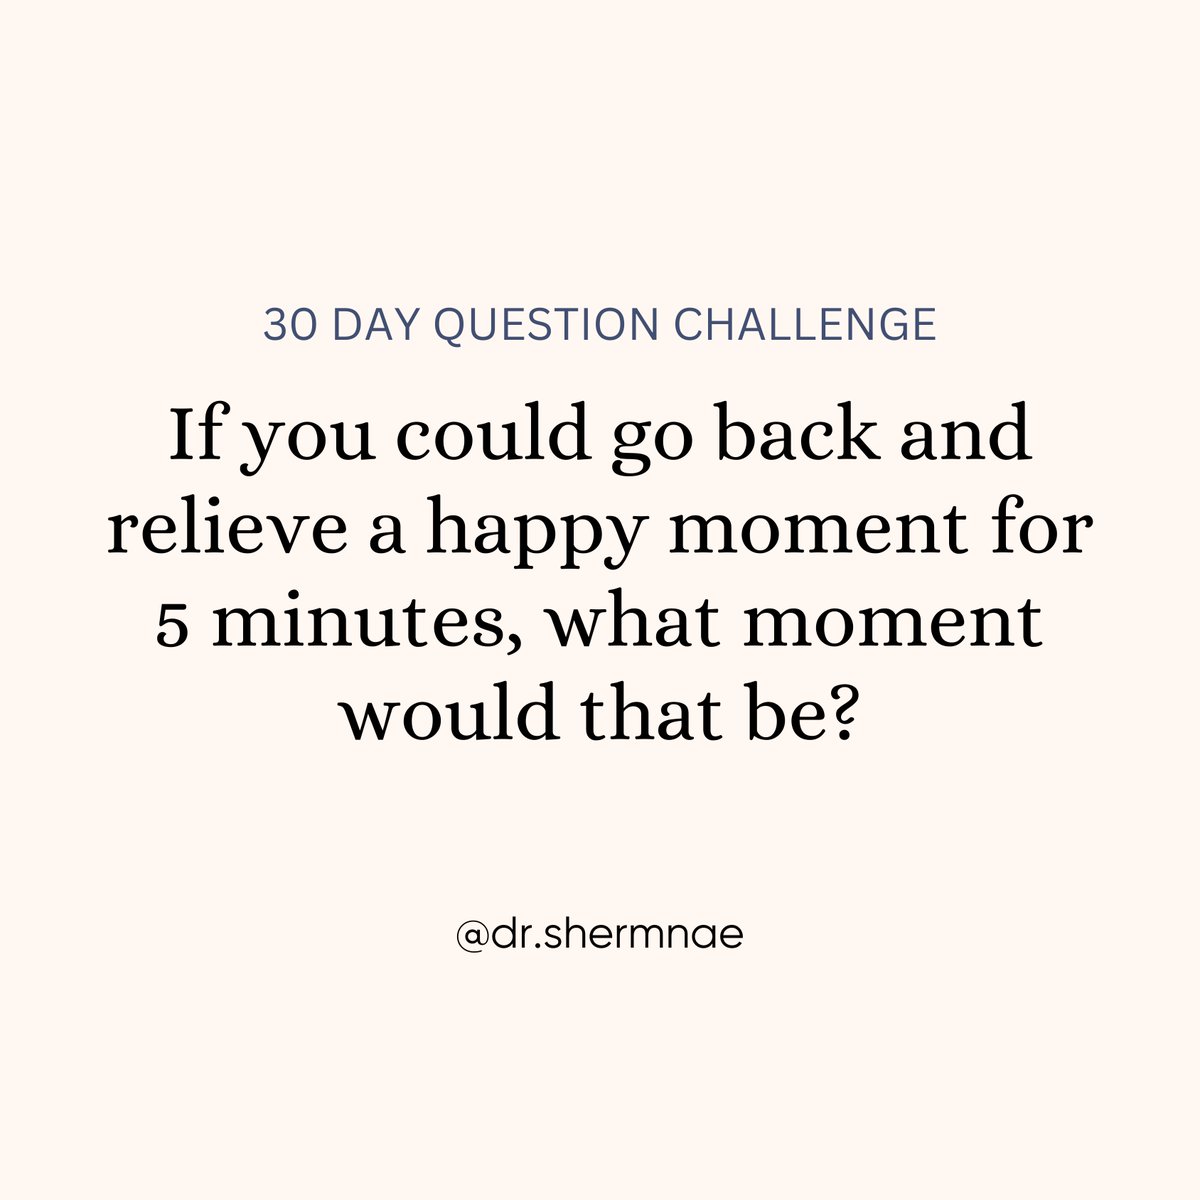 Day 20/30 - Share your answer below👇 👇

#drshermnae #personalcoach #success #business #inspiration #selflove #alignment #transformation #meditation #empaths #selfempowerment #vulnerability #intuition #higherself #intuitive #consciousness #abundance #confidence #motivationmonday